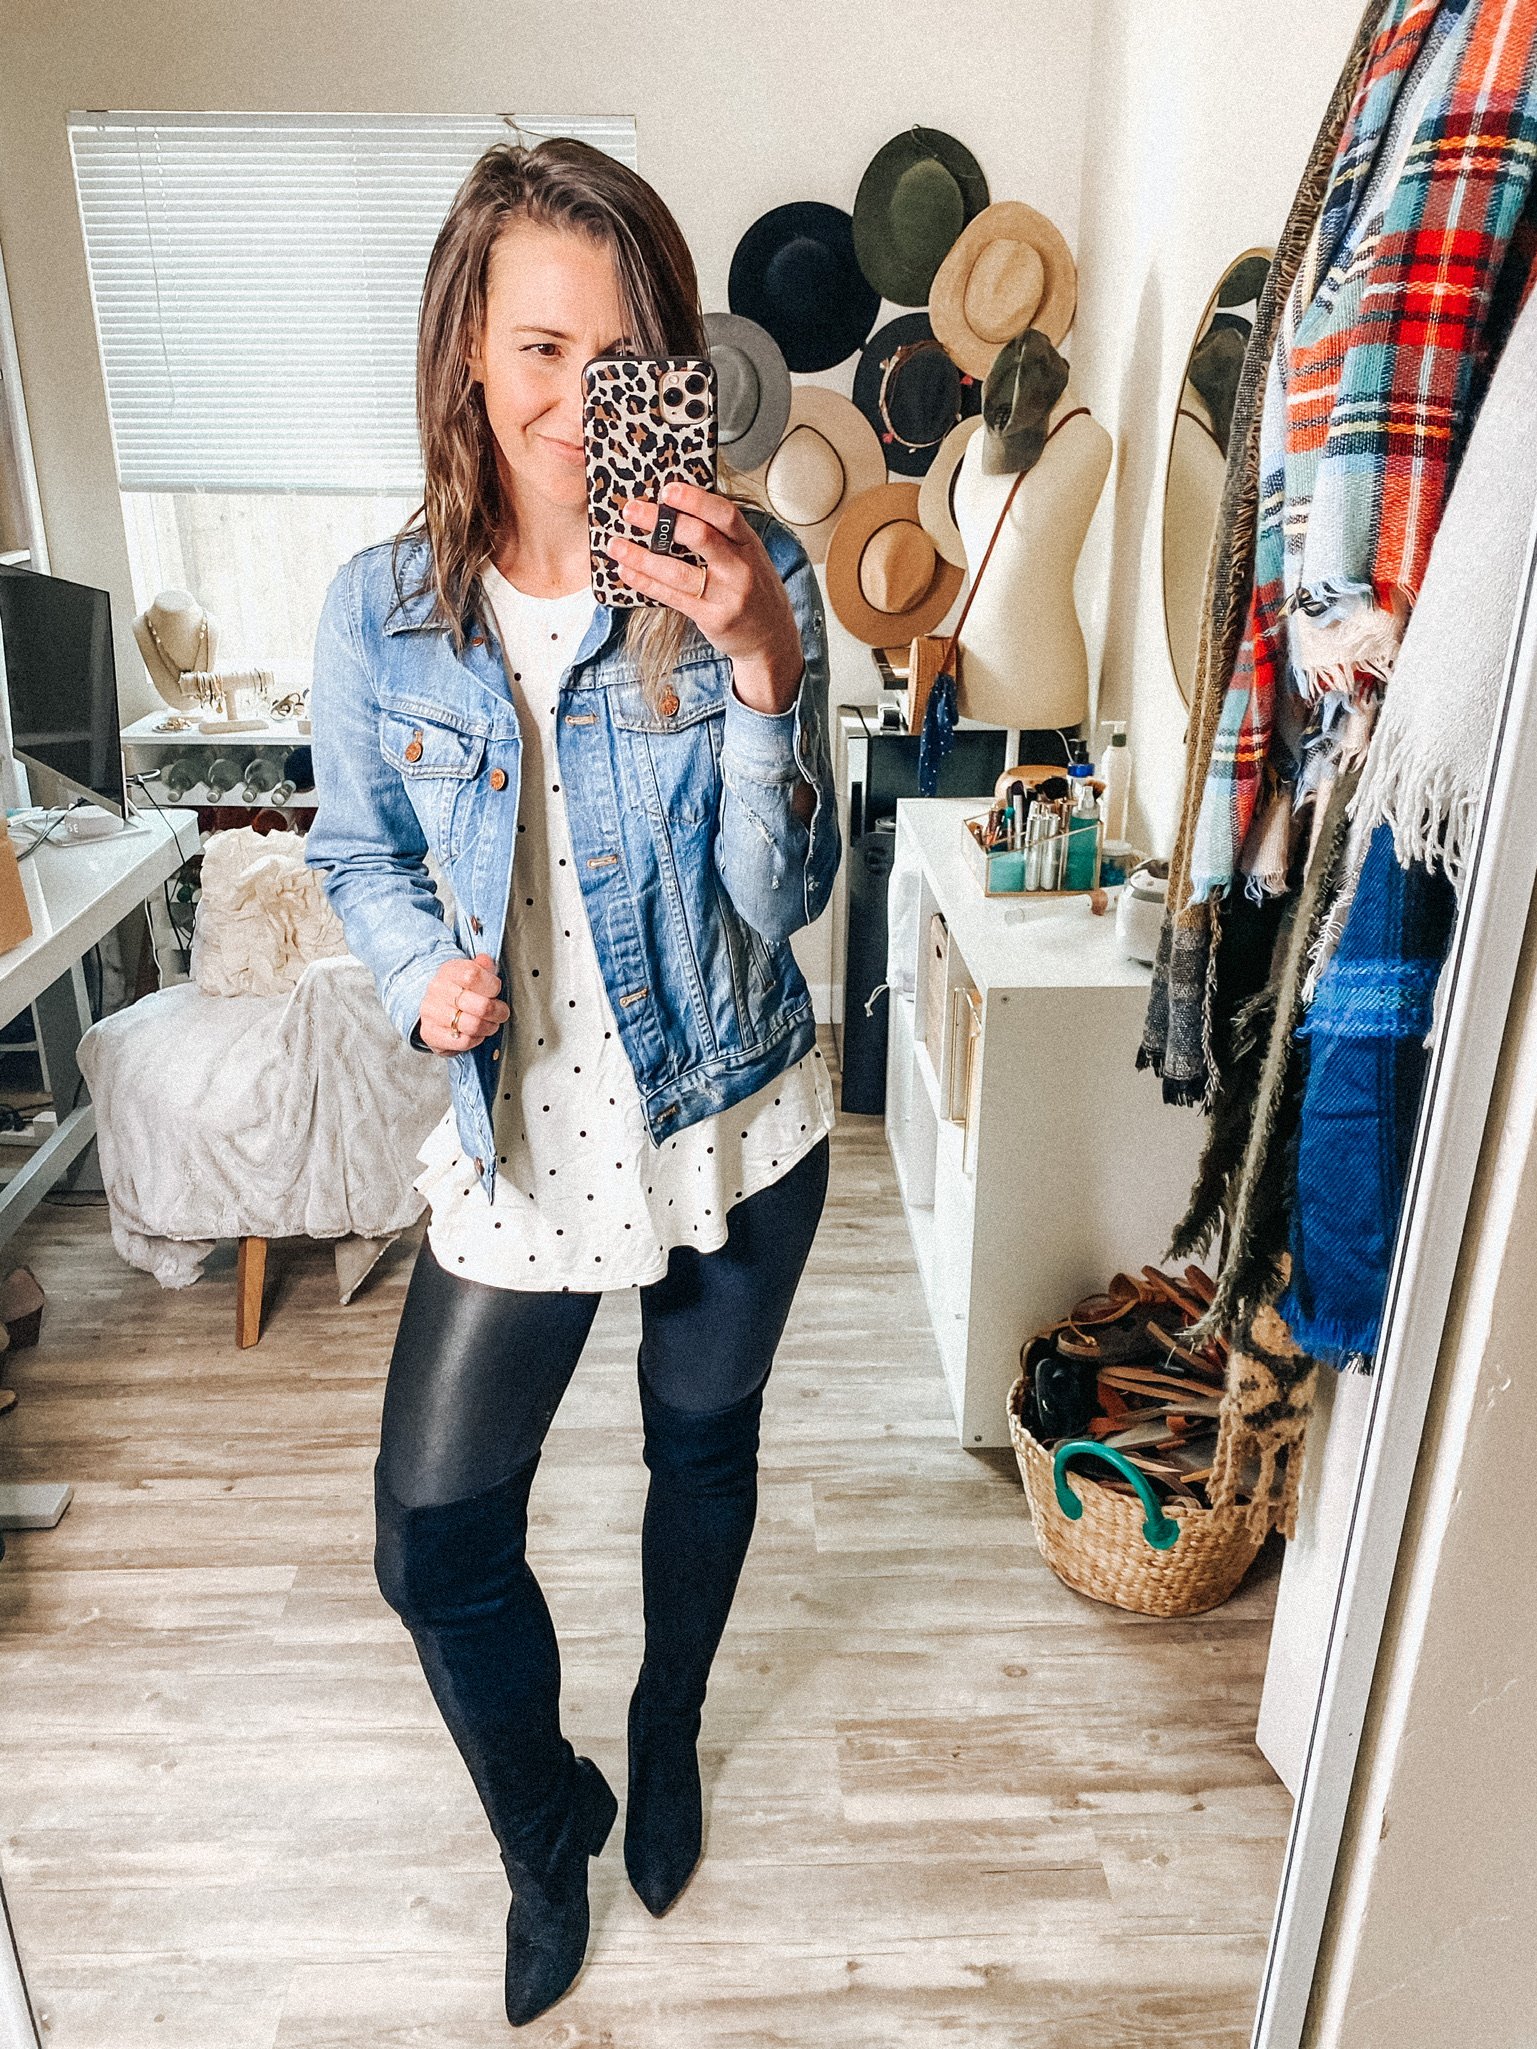 Does the denim jacket work with this dress/tights/shoes combo? : r/OUTFITS